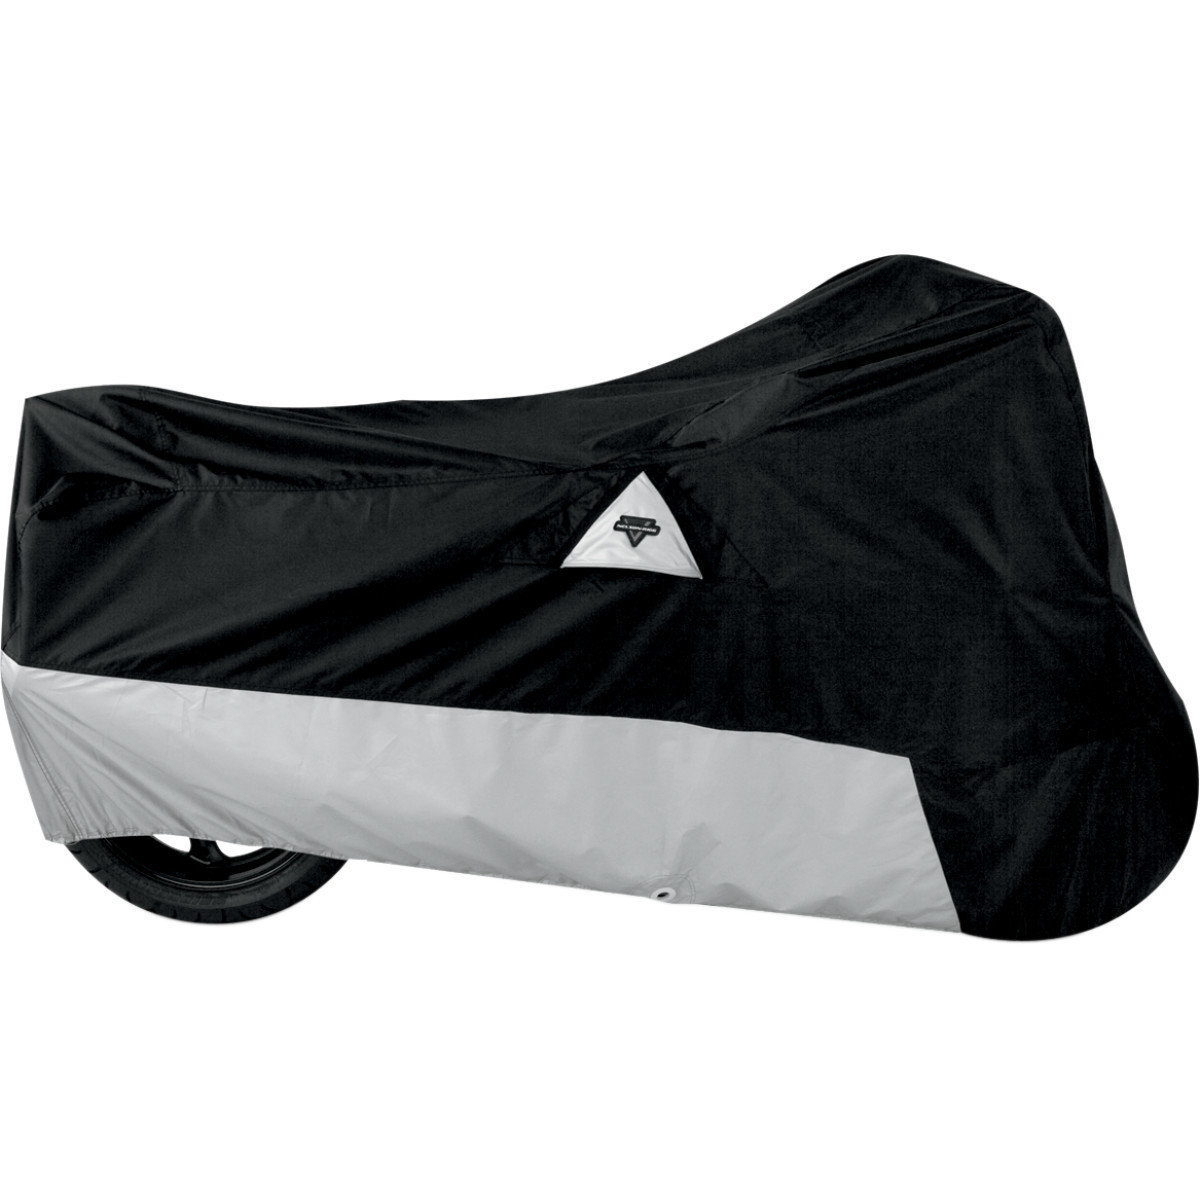 Motorcycle Cover Nelson Rigg Cover Defender 400 Black L